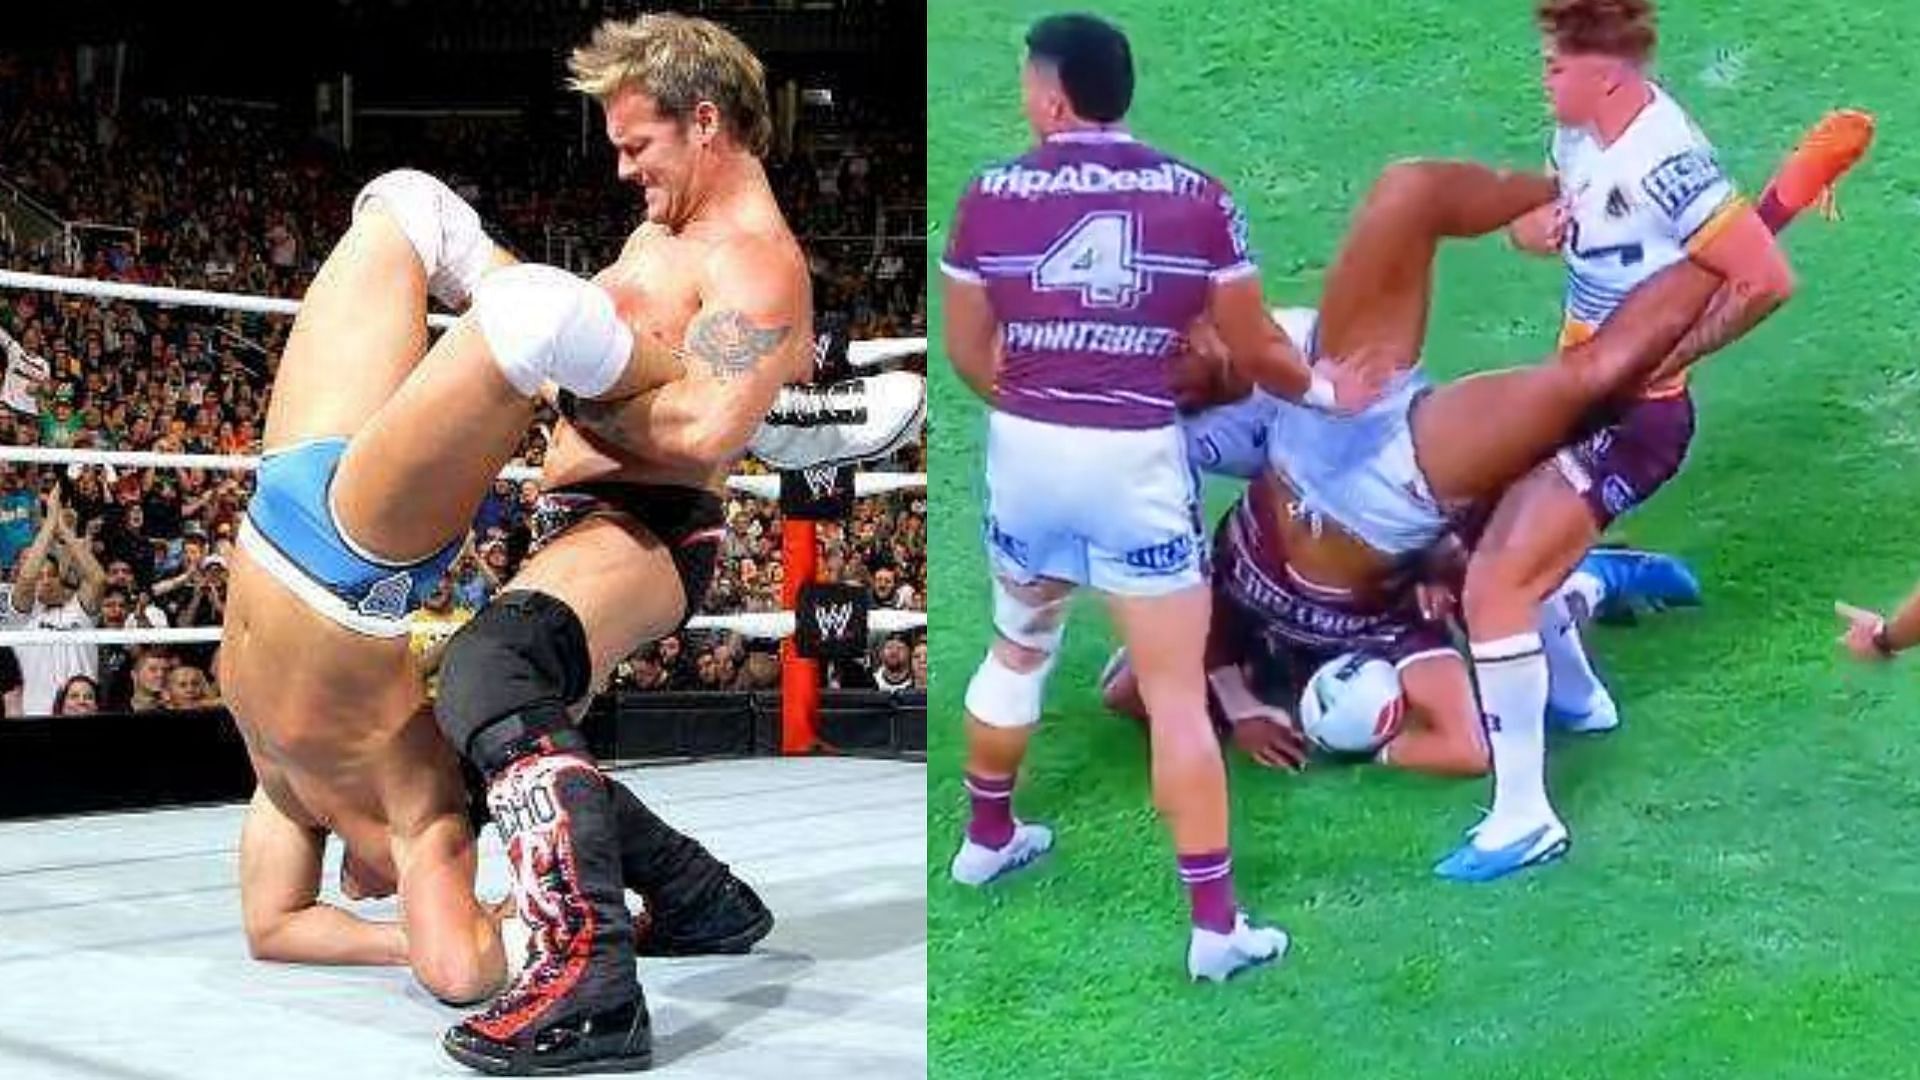 Chris Jericho submission move: Walls of Jericho